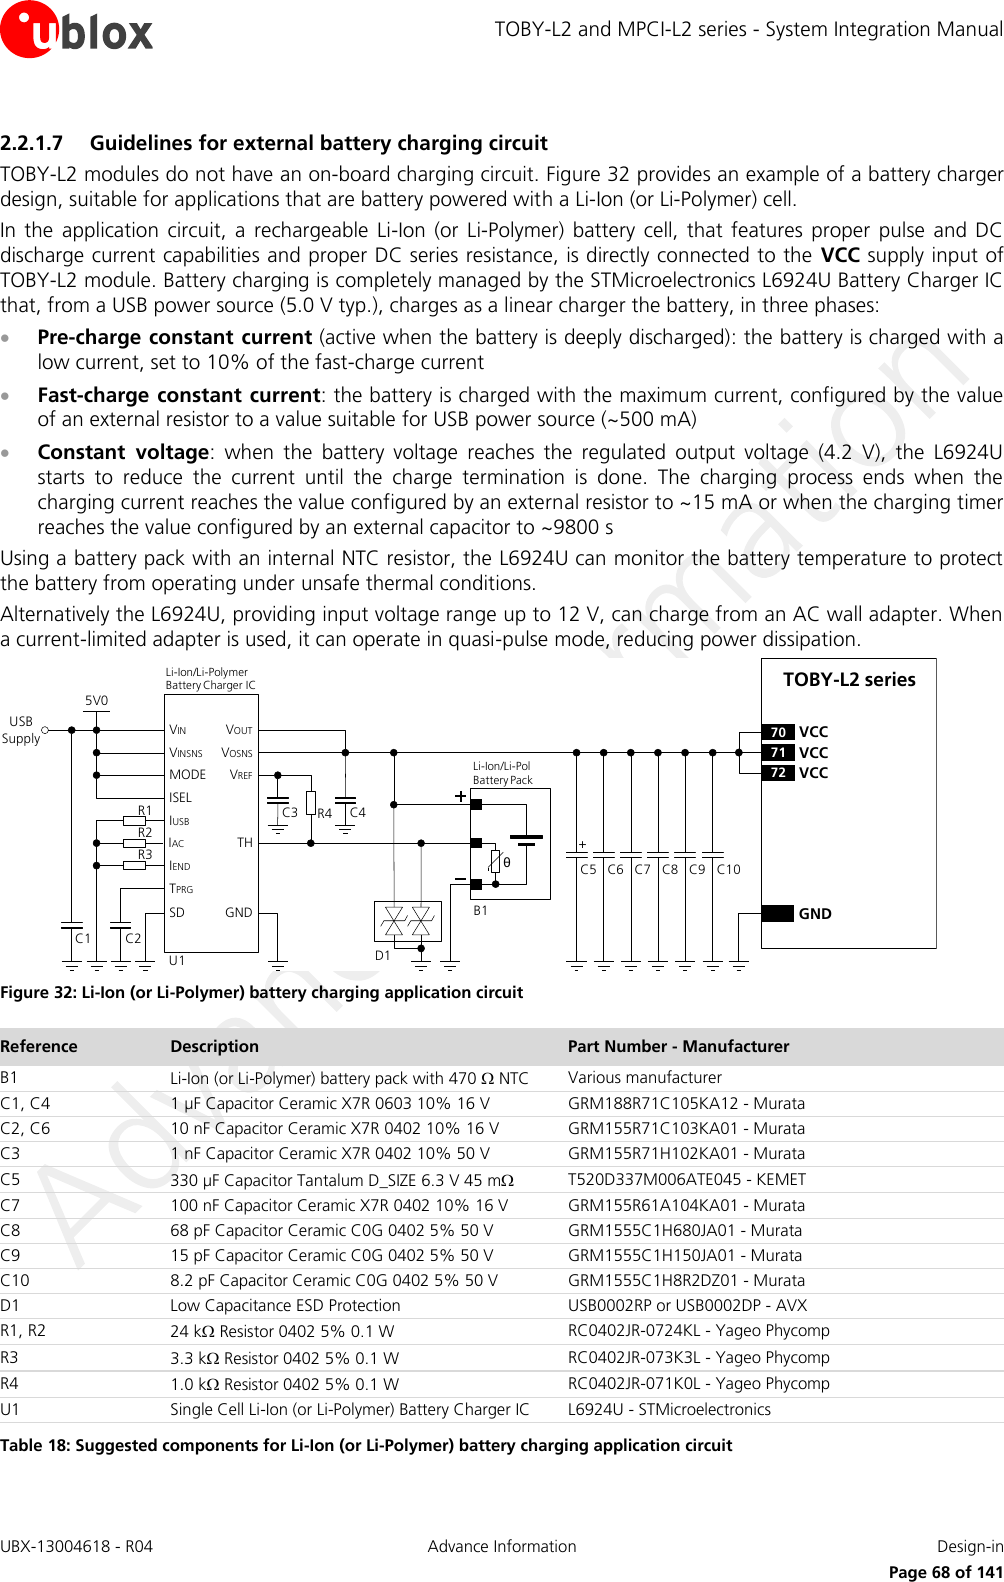 TOBY-L2 and MPCI-L2 series - System Integration Manual UBX-13004618 - R04  Advance Information  Design-in     Page 68 of 141 2.2.1.7 Guidelines for external battery charging circuit TOBY-L2 modules do not have an on-board charging circuit. Figure 32 provides an example of a battery charger design, suitable for applications that are battery powered with a Li-Ion (or Li-Polymer) cell. In  the  application  circuit,  a  rechargeable  Li-Ion  (or  Li-Polymer)  battery  cell,  that  features  proper  pulse  and  DC discharge current capabilities and proper DC series resistance, is directly connected to the  VCC supply input of TOBY-L2 module. Battery charging is completely managed by the STMicroelectronics L6924U Battery Charger IC that, from a USB power source (5.0 V typ.), charges as a linear charger the battery, in three phases:  Pre-charge constant current (active when the battery is deeply discharged): the battery is charged with a low current, set to 10% of the fast-charge current  Fast-charge constant current: the battery is charged with the maximum current, configured by the value of an external resistor to a value suitable for USB power source (~500 mA)  Constant  voltage:  when  the  battery  voltage  reaches  the  regulated  output  voltage  (4.2  V),  the  L6924U starts  to  reduce  the  current  until  the  charge  termination  is  done.  The  charging  process  ends  when  the charging current reaches the value configured by an external resistor to ~15 mA or when the charging timer reaches the value configured by an external capacitor to ~9800 s Using a battery pack with an internal NTC resistor, the L6924U can monitor the battery temperature to protect the battery from operating under unsafe thermal conditions. Alternatively the L6924U, providing input voltage range up to 12 V, can charge from an AC wall adapter. When a current-limited adapter is used, it can operate in quasi-pulse mode, reducing power dissipation. C5 C8C7C6 C9GNDTOBY-L2 series71 VCC72 VCC70 VCC+USB SupplyC3 R4θU1IUSBIACIENDTPRGSDVINVINSNSMODEISELC2C15V0THGNDVOUTVOSNSVREFR1R2R3Li-Ion/Li-Pol Battery PackD1B1C4Li-Ion/Li-Polymer    Battery Charger ICC10 Figure 32: Li-Ion (or Li-Polymer) battery charging application circuit Reference Description Part Number - Manufacturer B1 Li-Ion (or Li-Polymer) battery pack with 470  NTC Various manufacturer C1, C4 1 µF Capacitor Ceramic X7R 0603 10% 16 V GRM188R71C105KA12 - Murata C2, C6 10 nF Capacitor Ceramic X7R 0402 10% 16 V GRM155R71C103KA01 - Murata C3 1 nF Capacitor Ceramic X7R 0402 10% 50 V GRM155R71H102KA01 - Murata C5 330 µF Capacitor Tantalum D_SIZE 6.3 V 45 m T520D337M006ATE045 - KEMET C7 100 nF Capacitor Ceramic X7R 0402 10% 16 V GRM155R61A104KA01 - Murata C8 68 pF Capacitor Ceramic C0G 0402 5% 50 V GRM1555C1H680JA01 - Murata C9 15 pF Capacitor Ceramic C0G 0402 5% 50 V GRM1555C1H150JA01 - Murata C10 8.2 pF Capacitor Ceramic C0G 0402 5% 50 V GRM1555C1H8R2DZ01 - Murata D1 Low Capacitance ESD Protection USB0002RP or USB0002DP - AVX R1, R2 24 k Resistor 0402 5% 0.1 W RC0402JR-0724KL - Yageo Phycomp R3 3.3 k Resistor 0402 5% 0.1 W RC0402JR-073K3L - Yageo Phycomp R4 1.0 k Resistor 0402 5% 0.1 W RC0402JR-071K0L - Yageo Phycomp U1 Single Cell Li-Ion (or Li-Polymer) Battery Charger IC  L6924U - STMicroelectronics Table 18: Suggested components for Li-Ion (or Li-Polymer) battery charging application circuit  